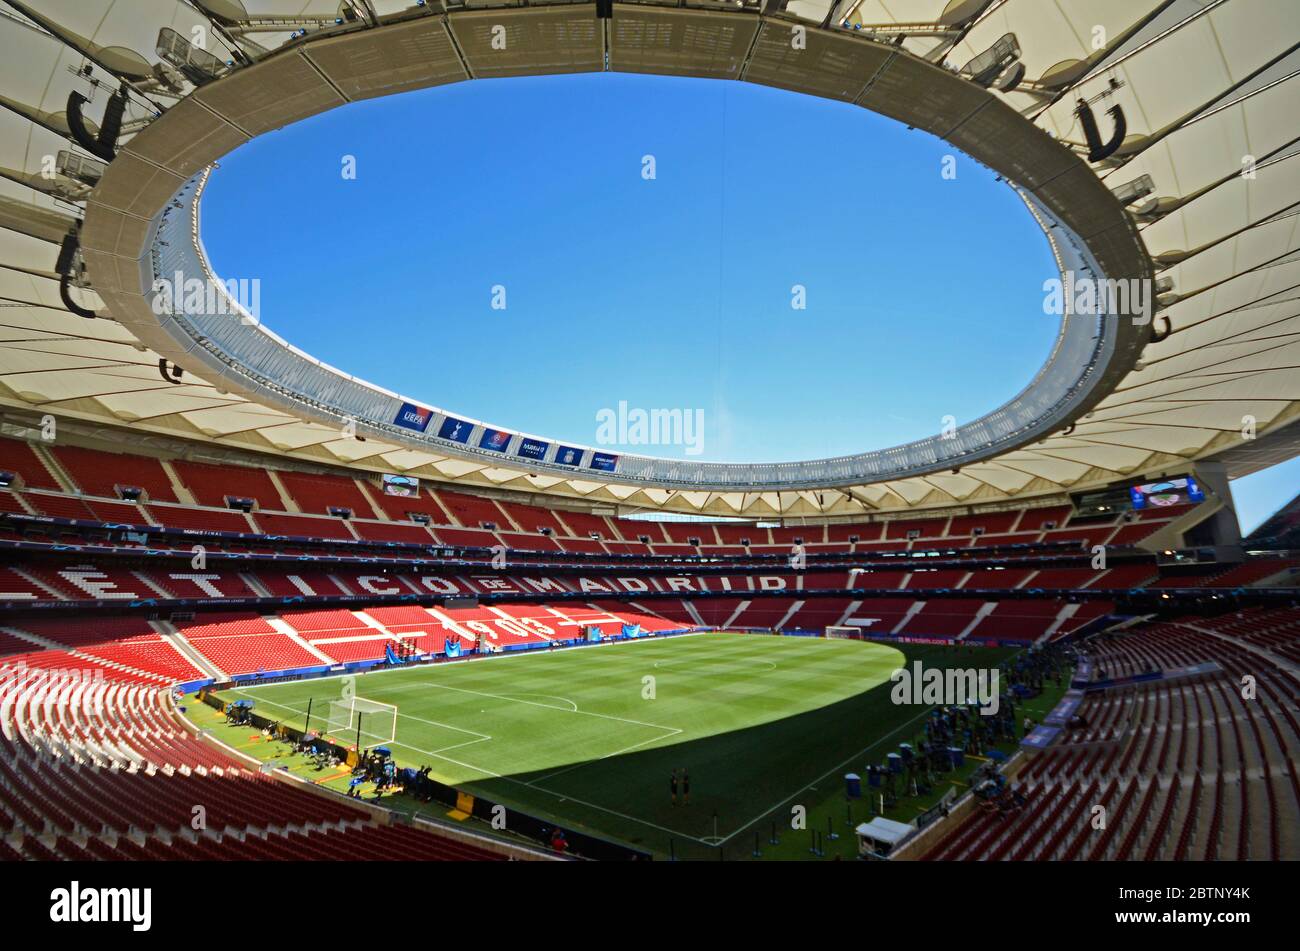 MADRID, SPAIN - MAY 31, 2019: General view of the venue pictured one day before the 2018/19 UEFA Champions League Final between Tottenham Hotspur (England) and Liverpool FC (England) at Wanda Metropolitano. Stock Photo